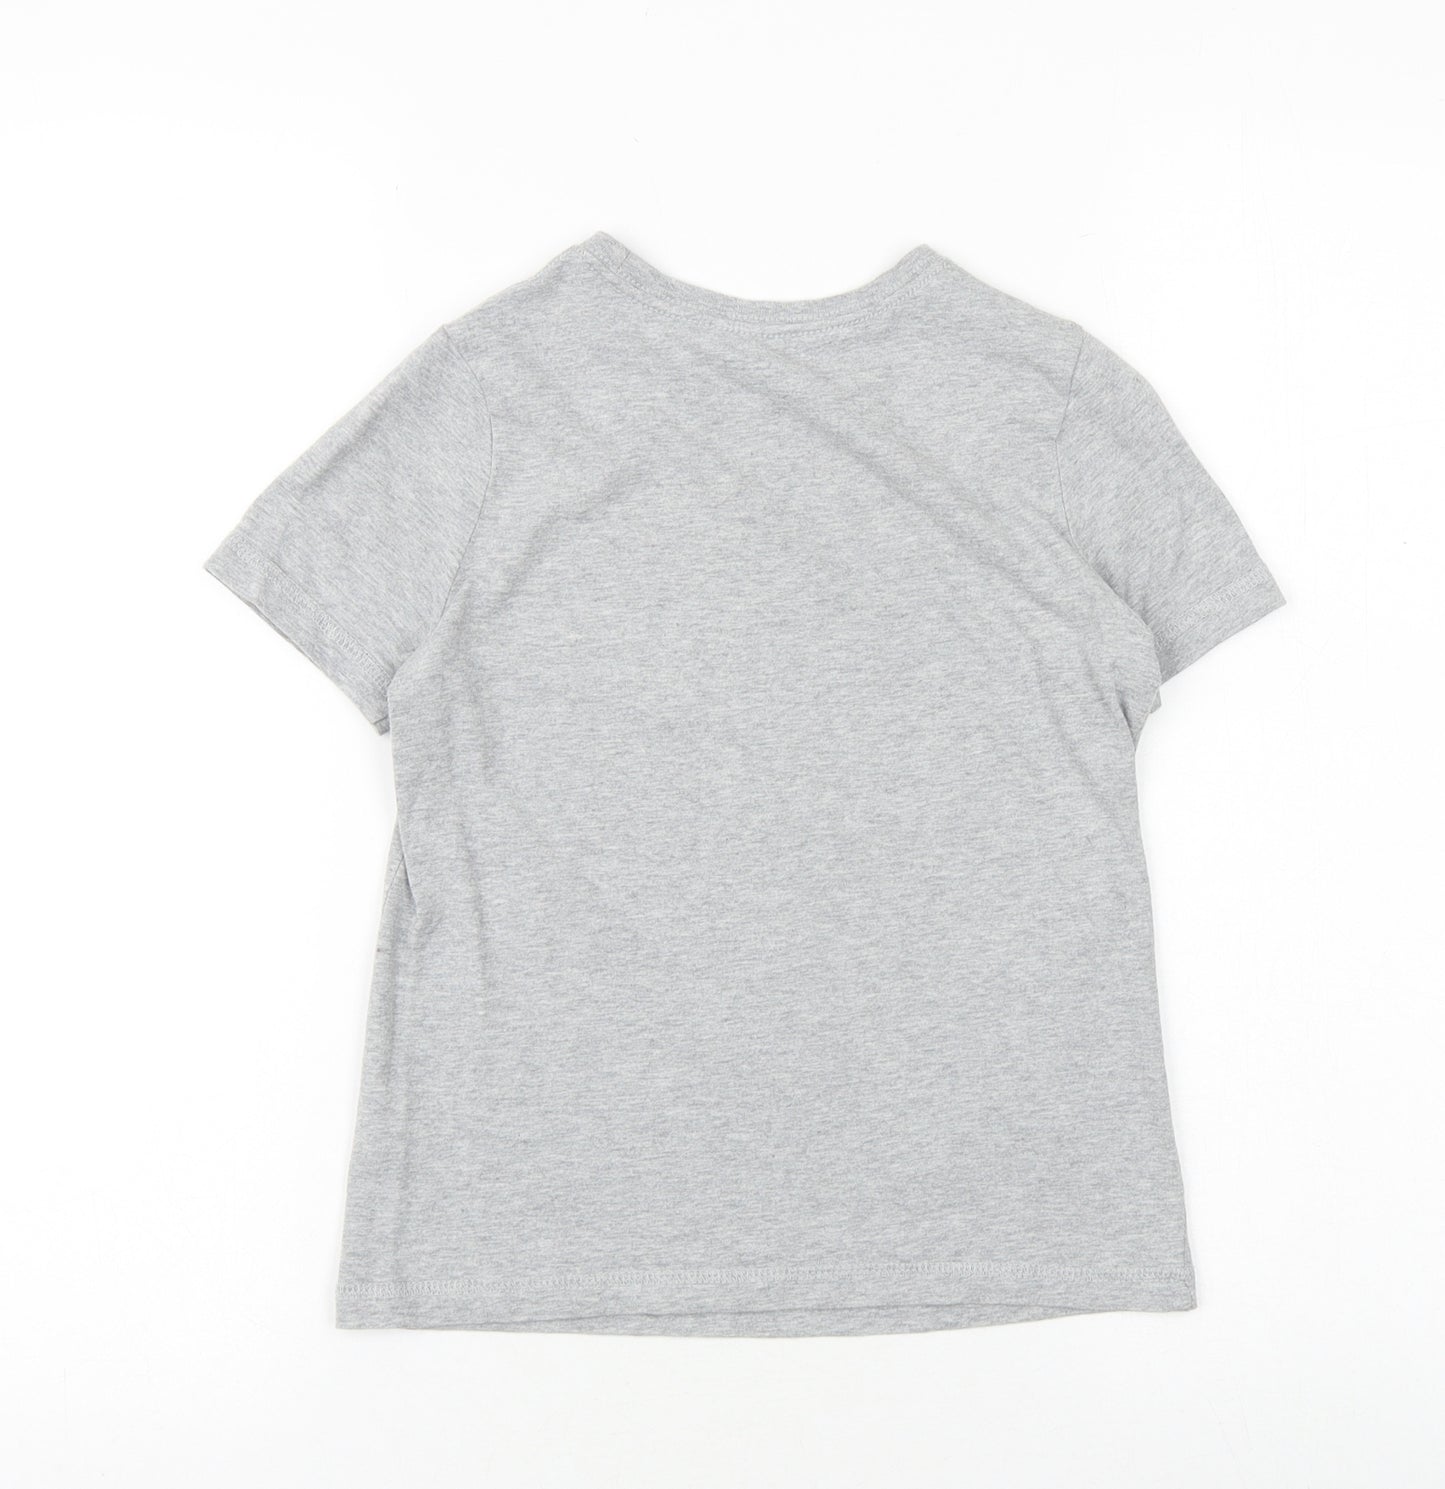 F&F Boys Grey Cotton Basic T-Shirt Size 6-7 Years Round Neck Pullover - Play